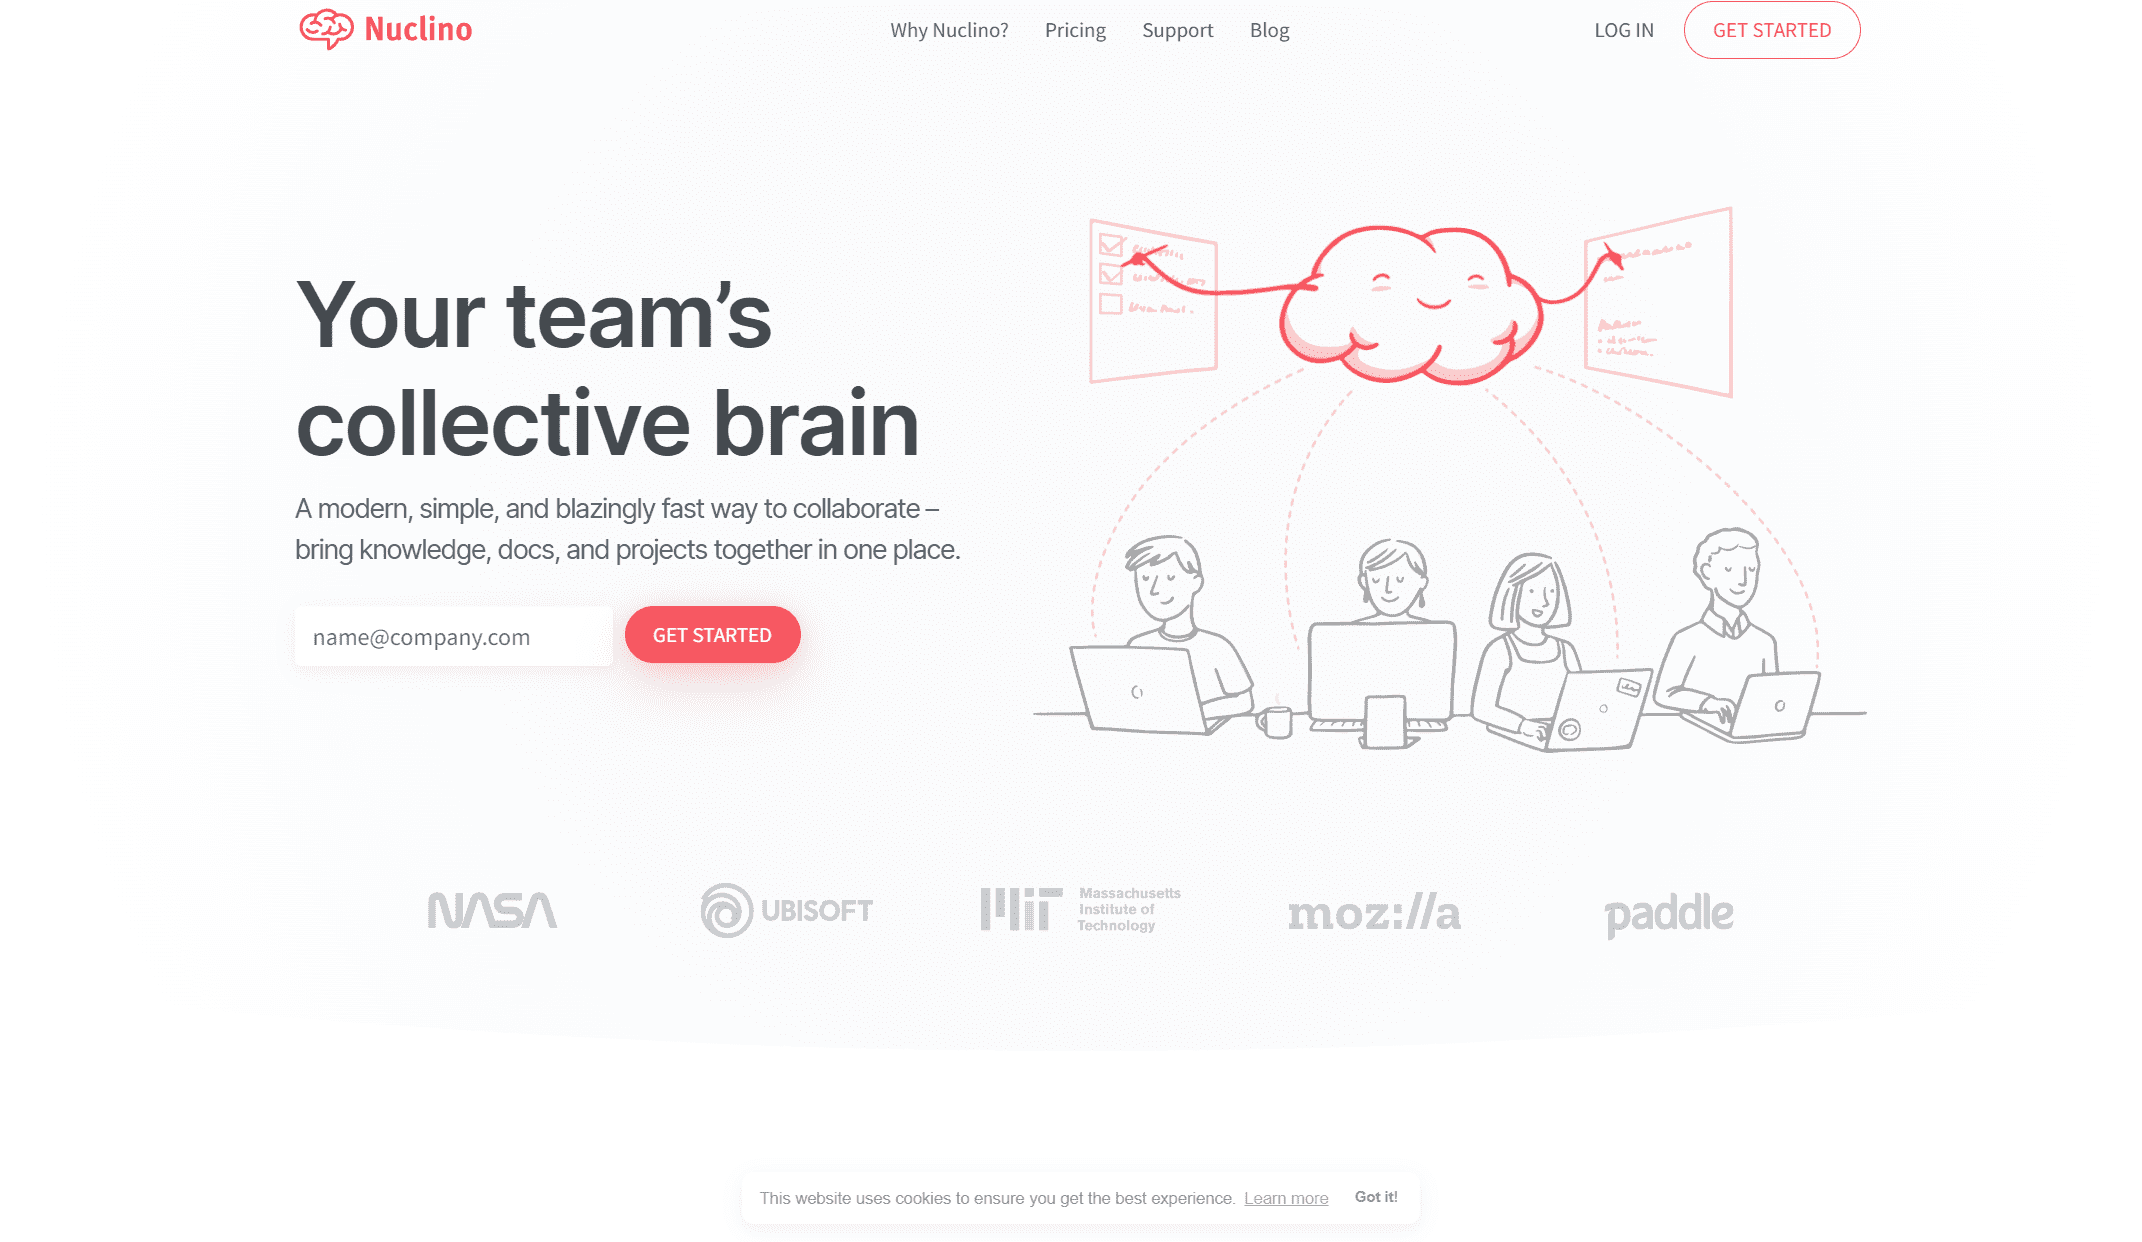 Nuclino Homepage: Your team's collective brain